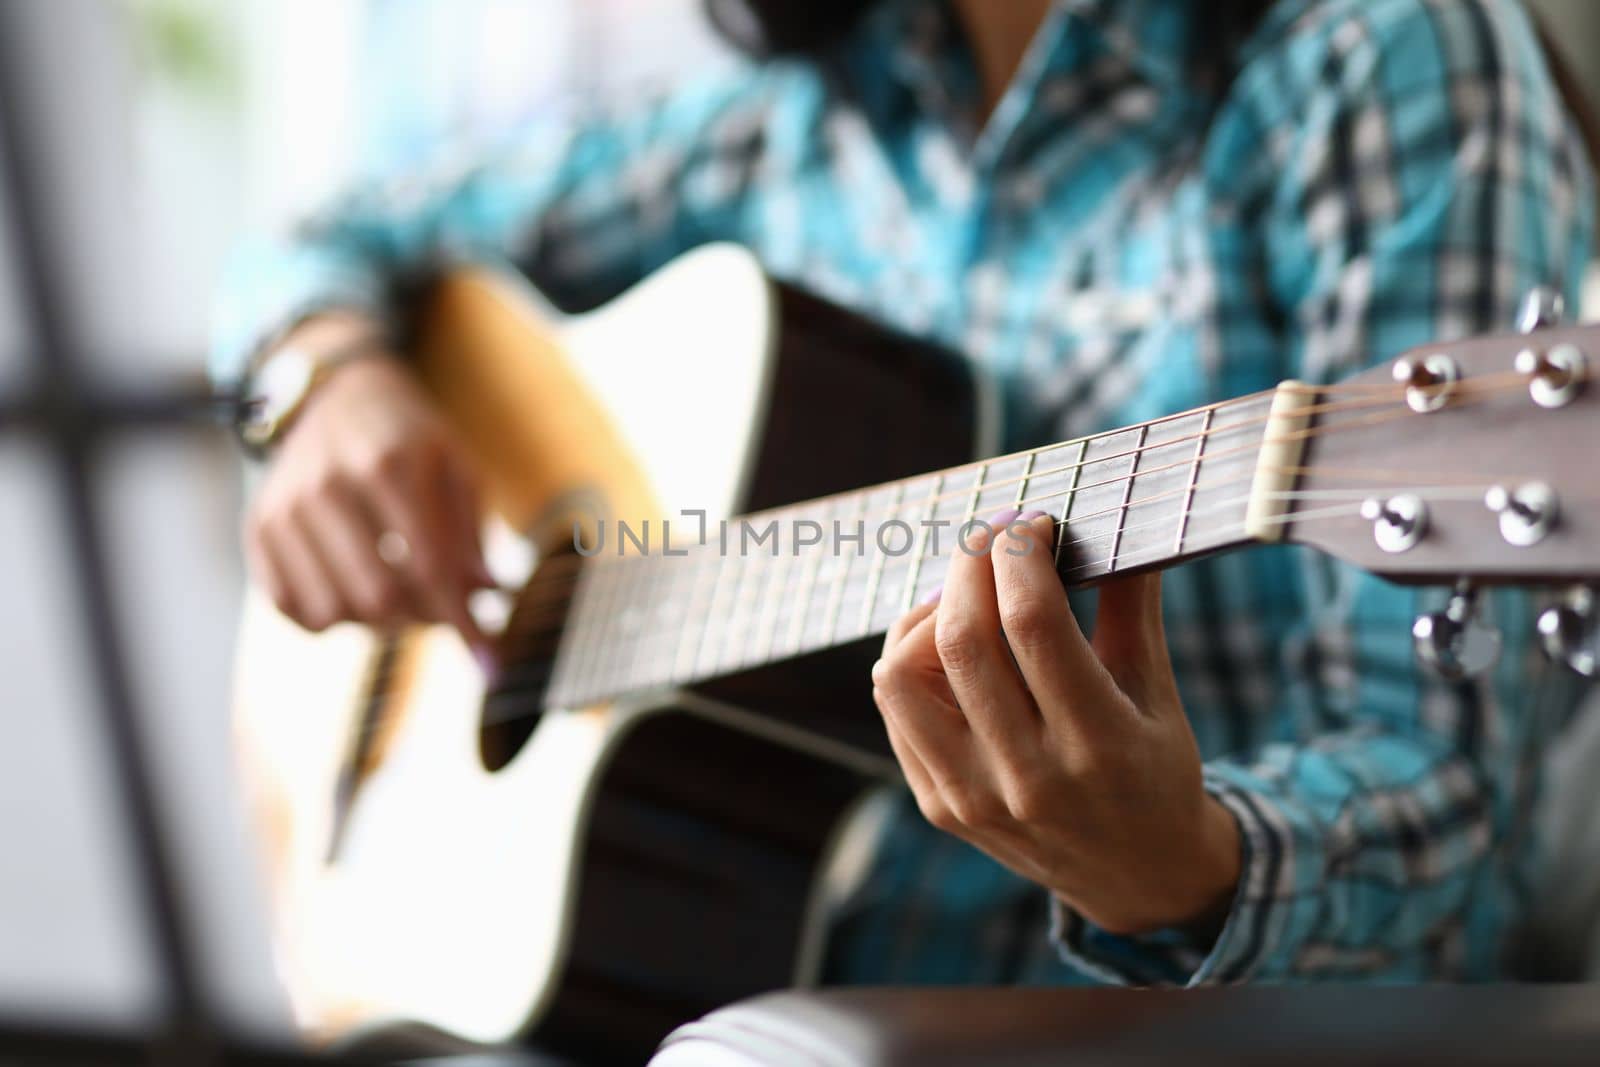 Woman hands playing guitar closeup. Learning to play acoustic guitar concept